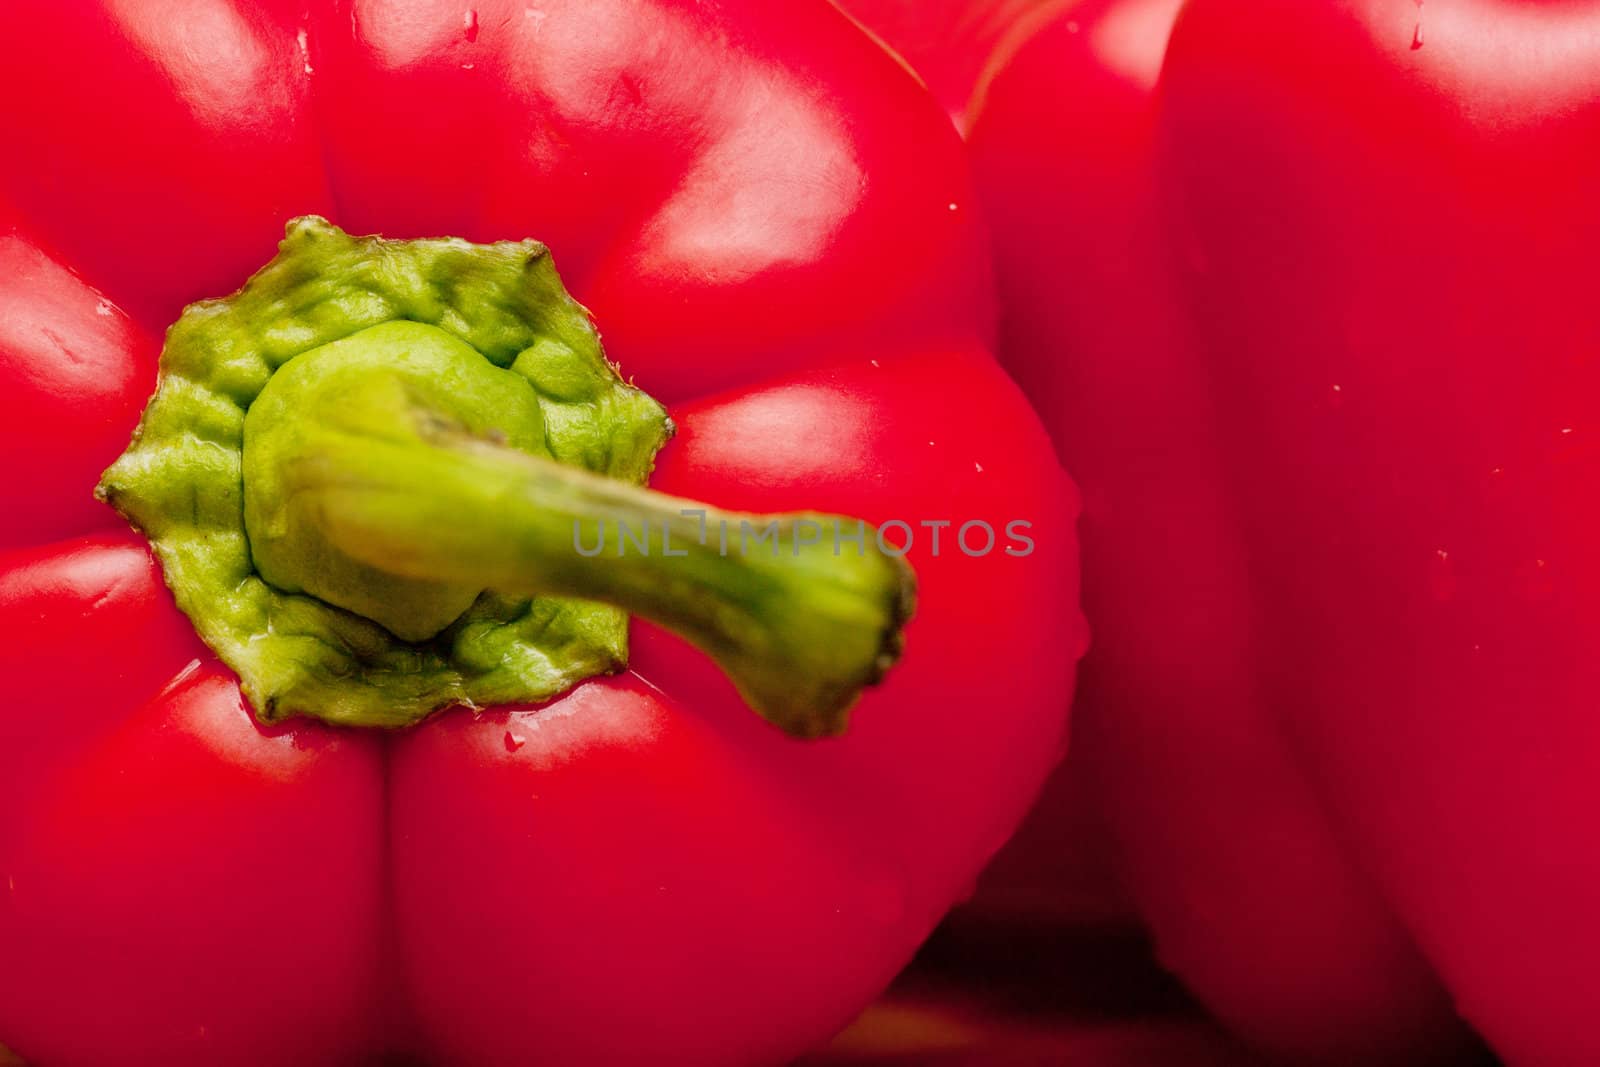 Macro view of sweet red peppers